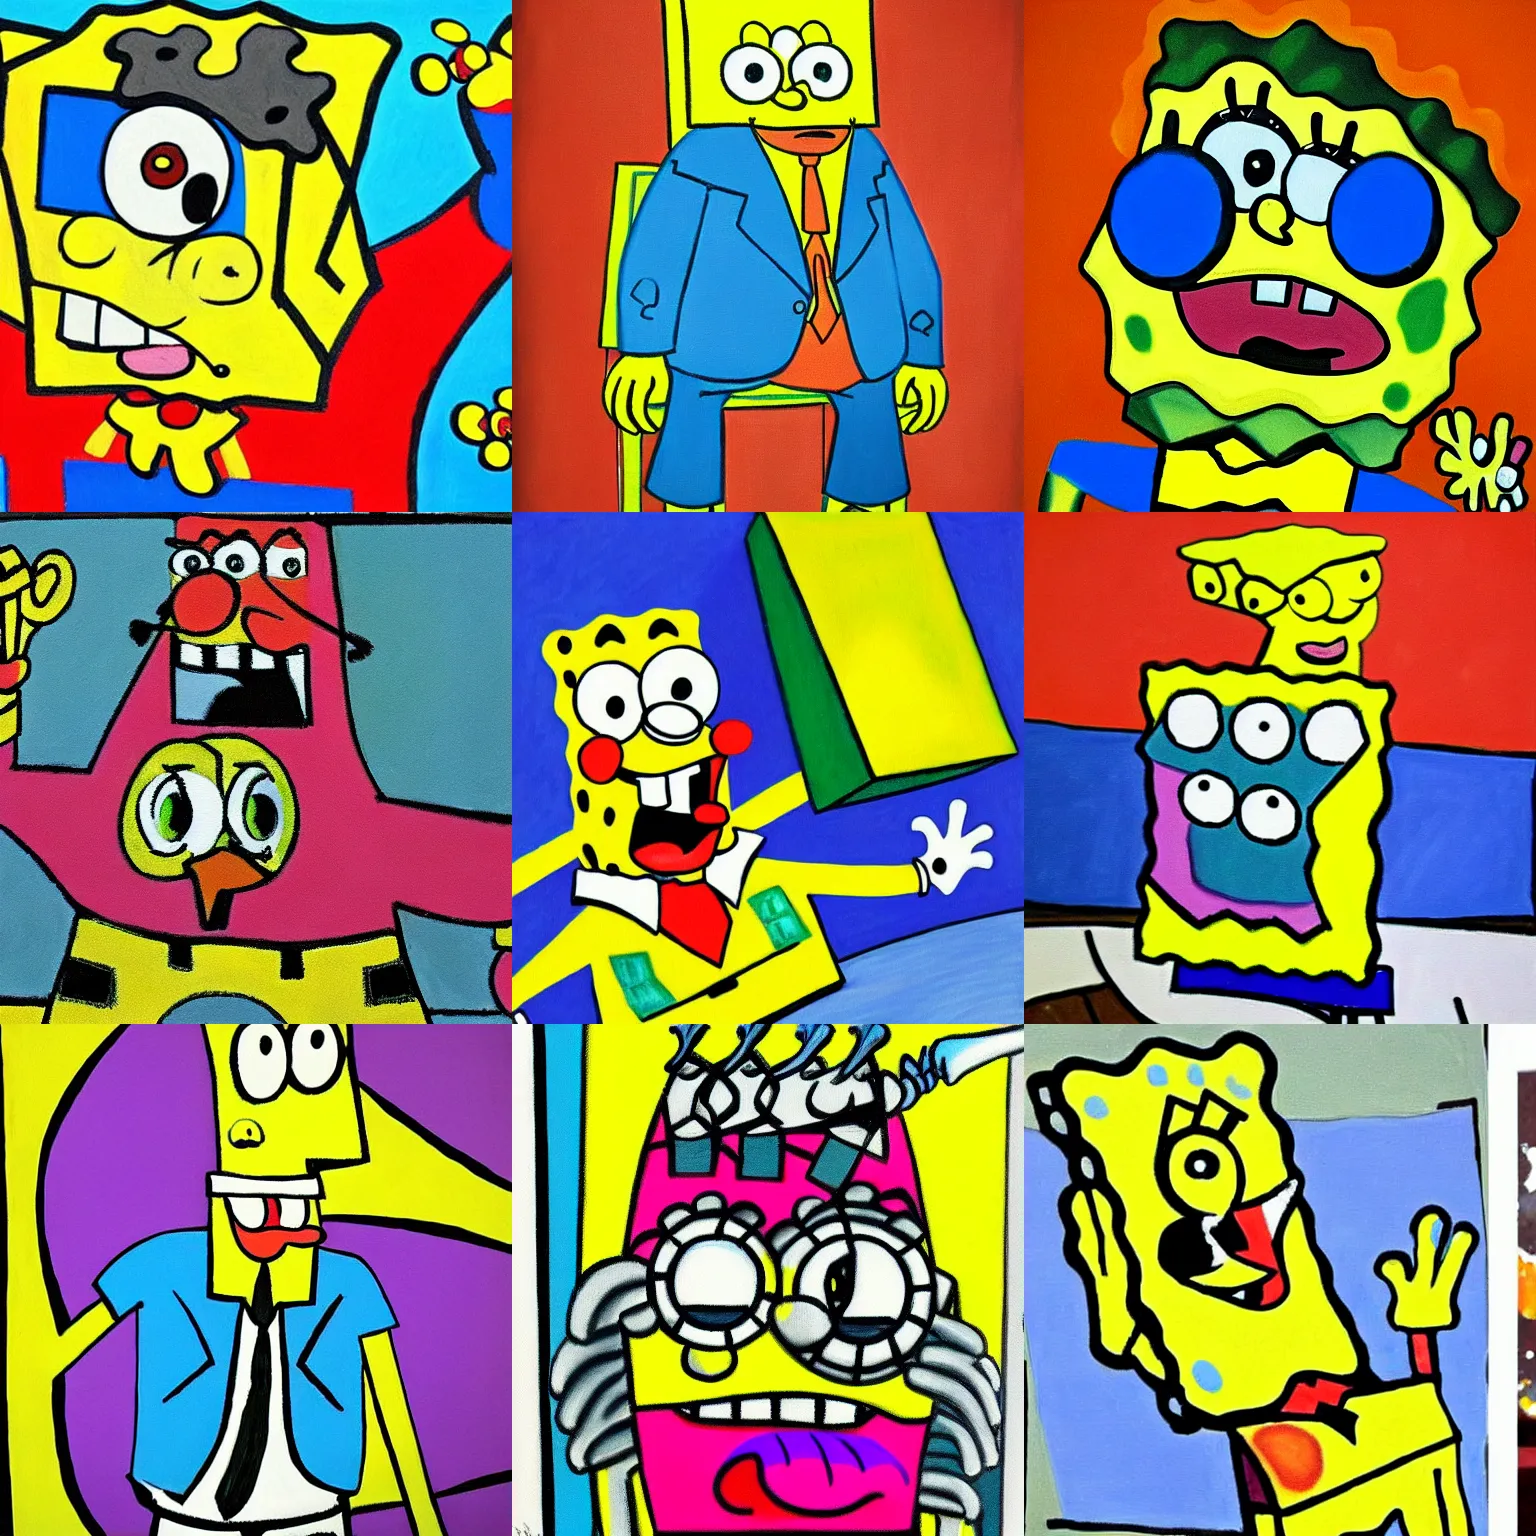 Prompt: spongebob painted by pablo picasso,